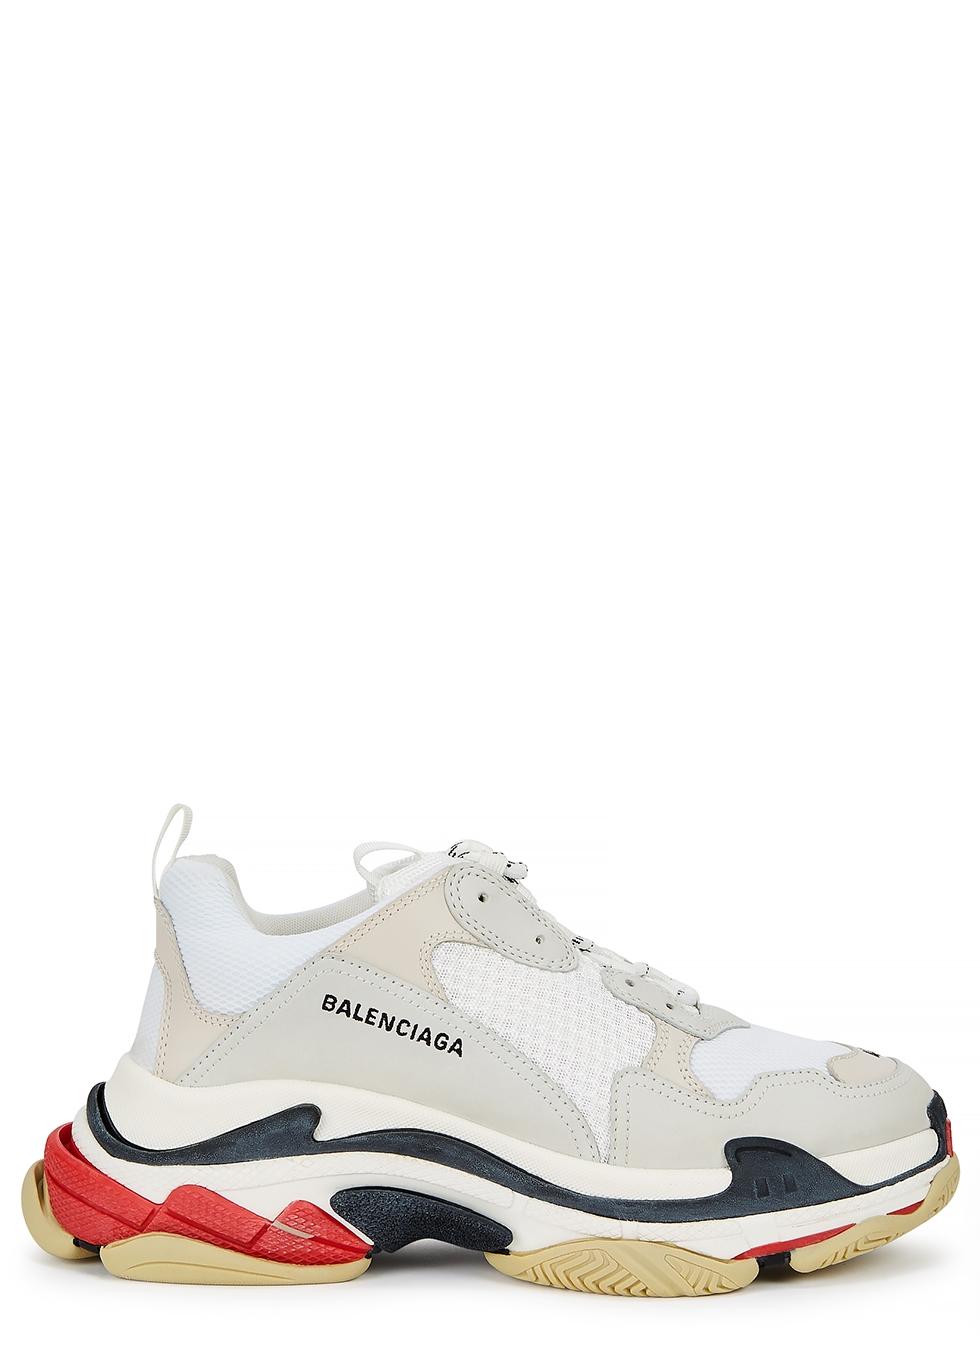 For sale new Balenciaga Triple S Trainers Red Pinterest